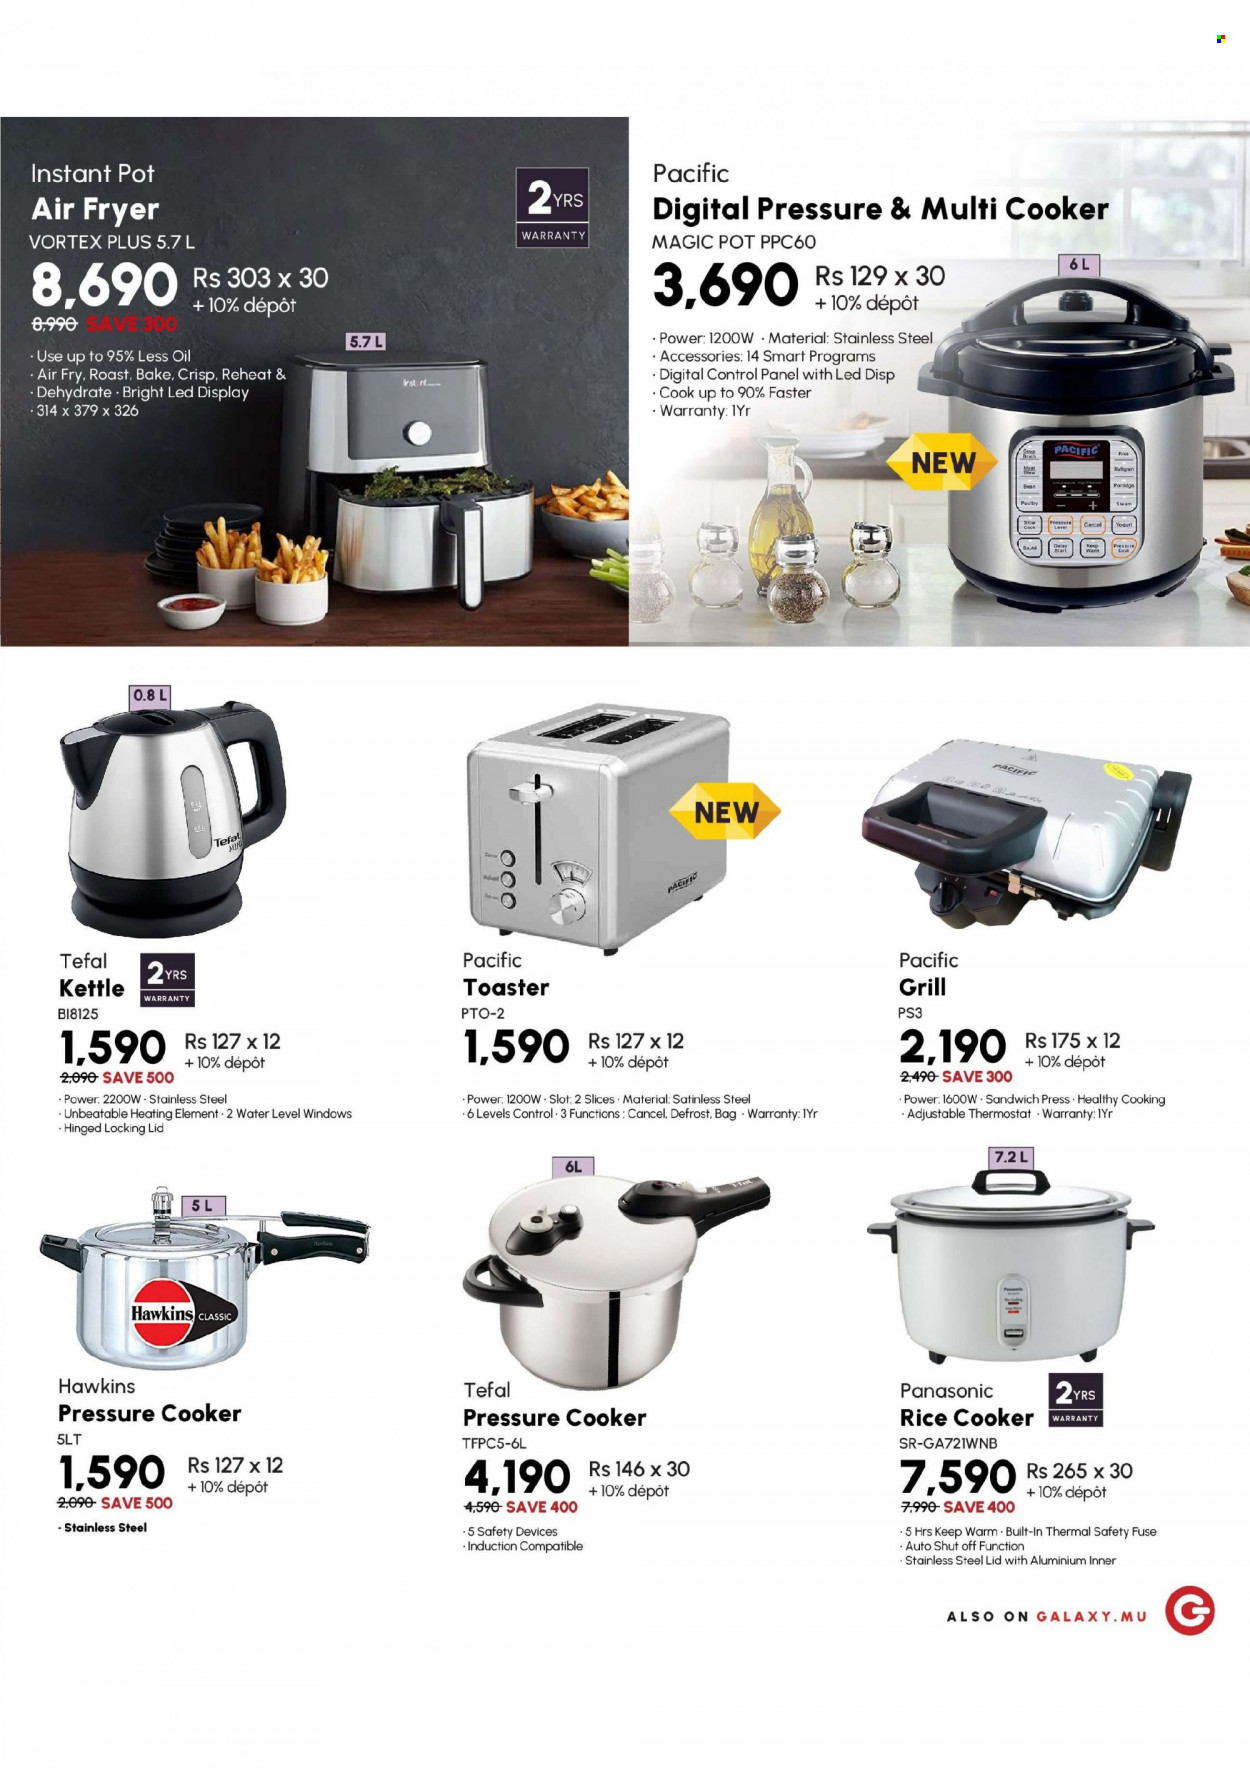 Galaxy Catalogue - Sales products - Tefal, lid, pot, pressure cooker, rice cooker, multifunction cooker, air fryer, Instant Pot, sandwich press, kettle, bag, grill, Panasonic, toaster. Page 5.